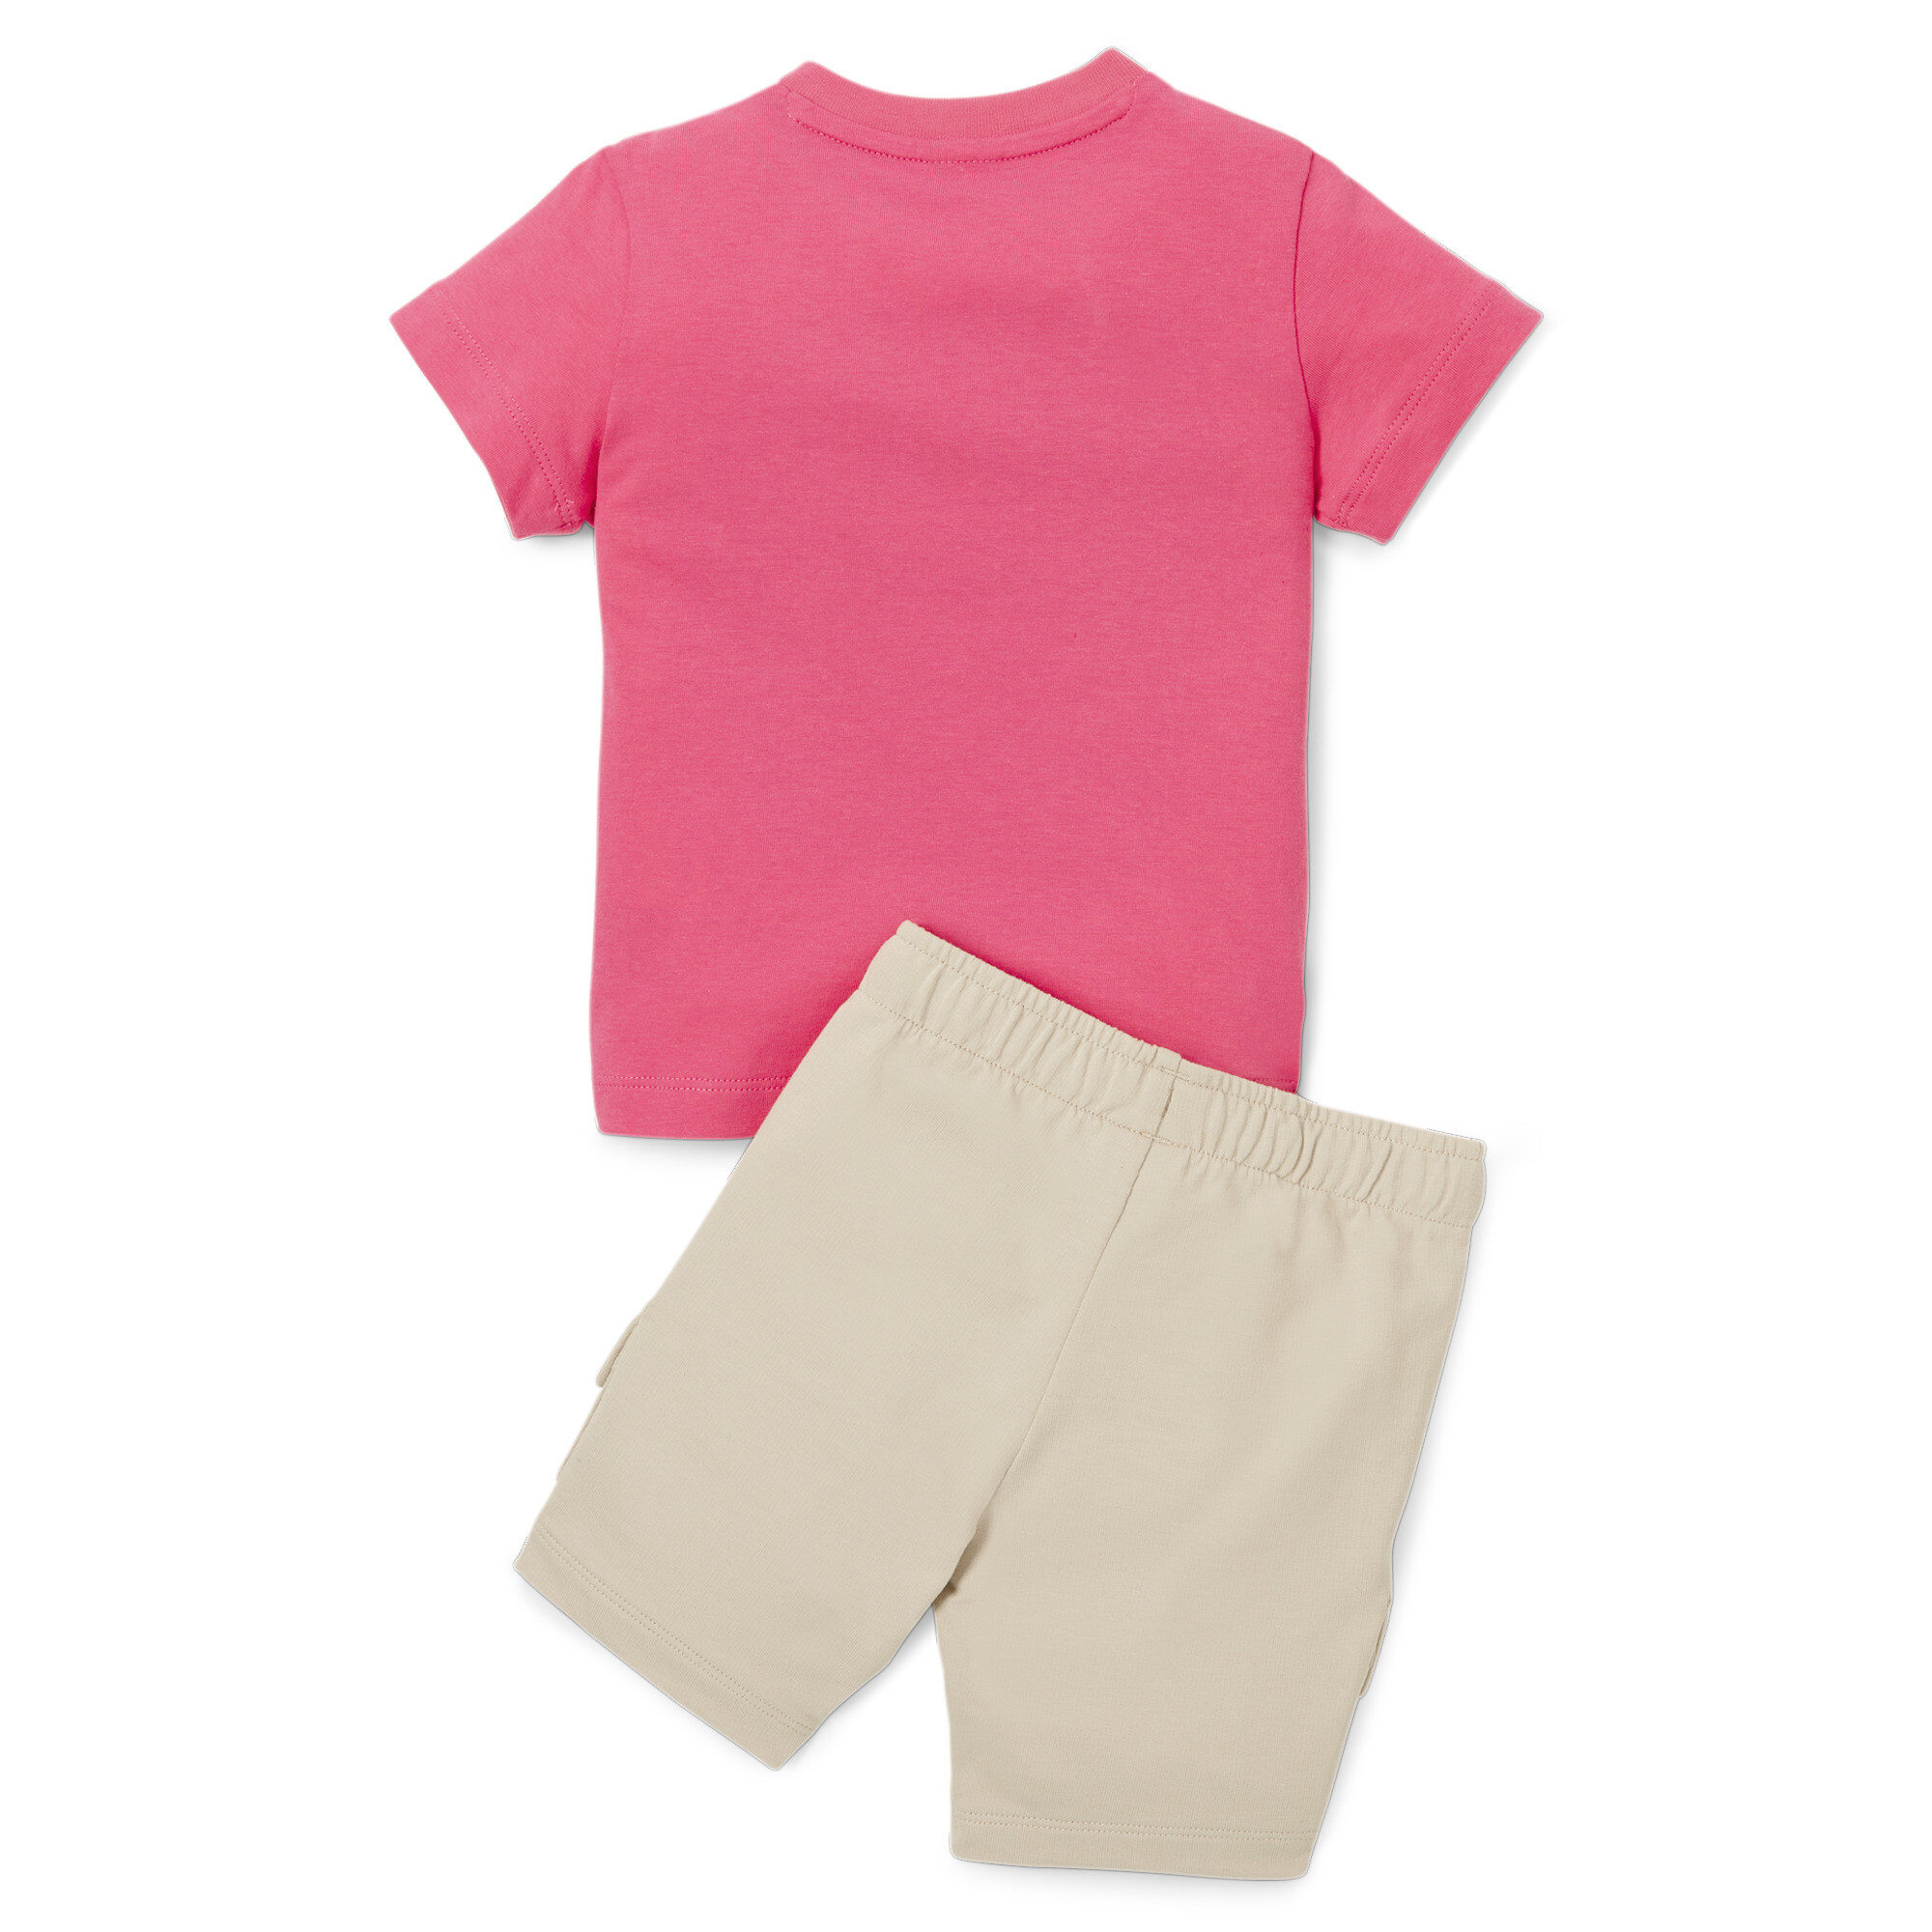 Kids' PUMA Minicats Downtown Set Baby In Pink, Size 2-4 Months